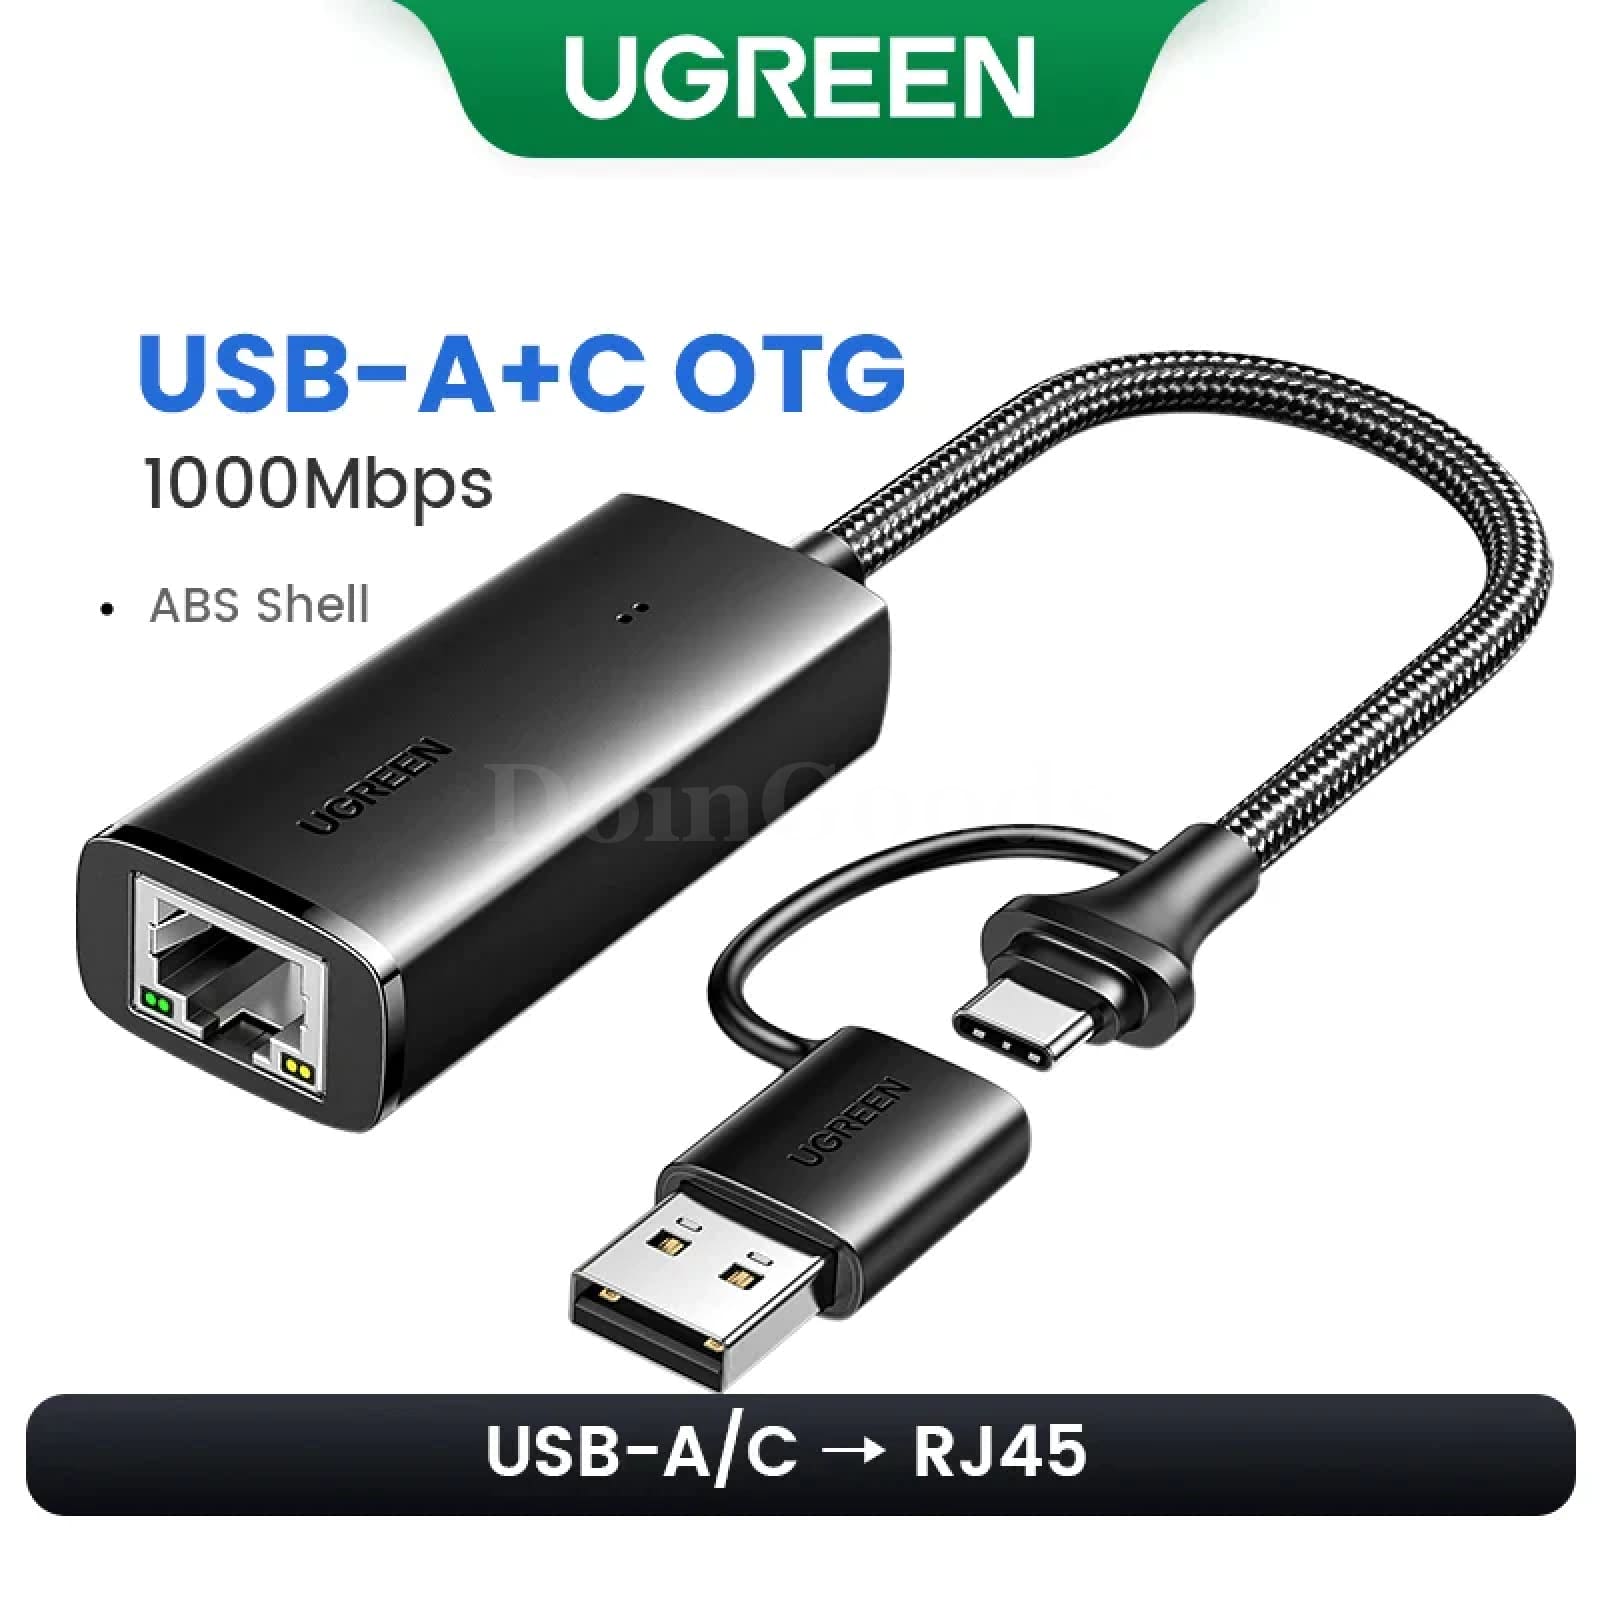 Ugreen Usb Ethernet Adapter 1000/100Mbps 3.0 Hub For Xiaomi Mi Box Macbook 2-In-1 Only Rj45 301635